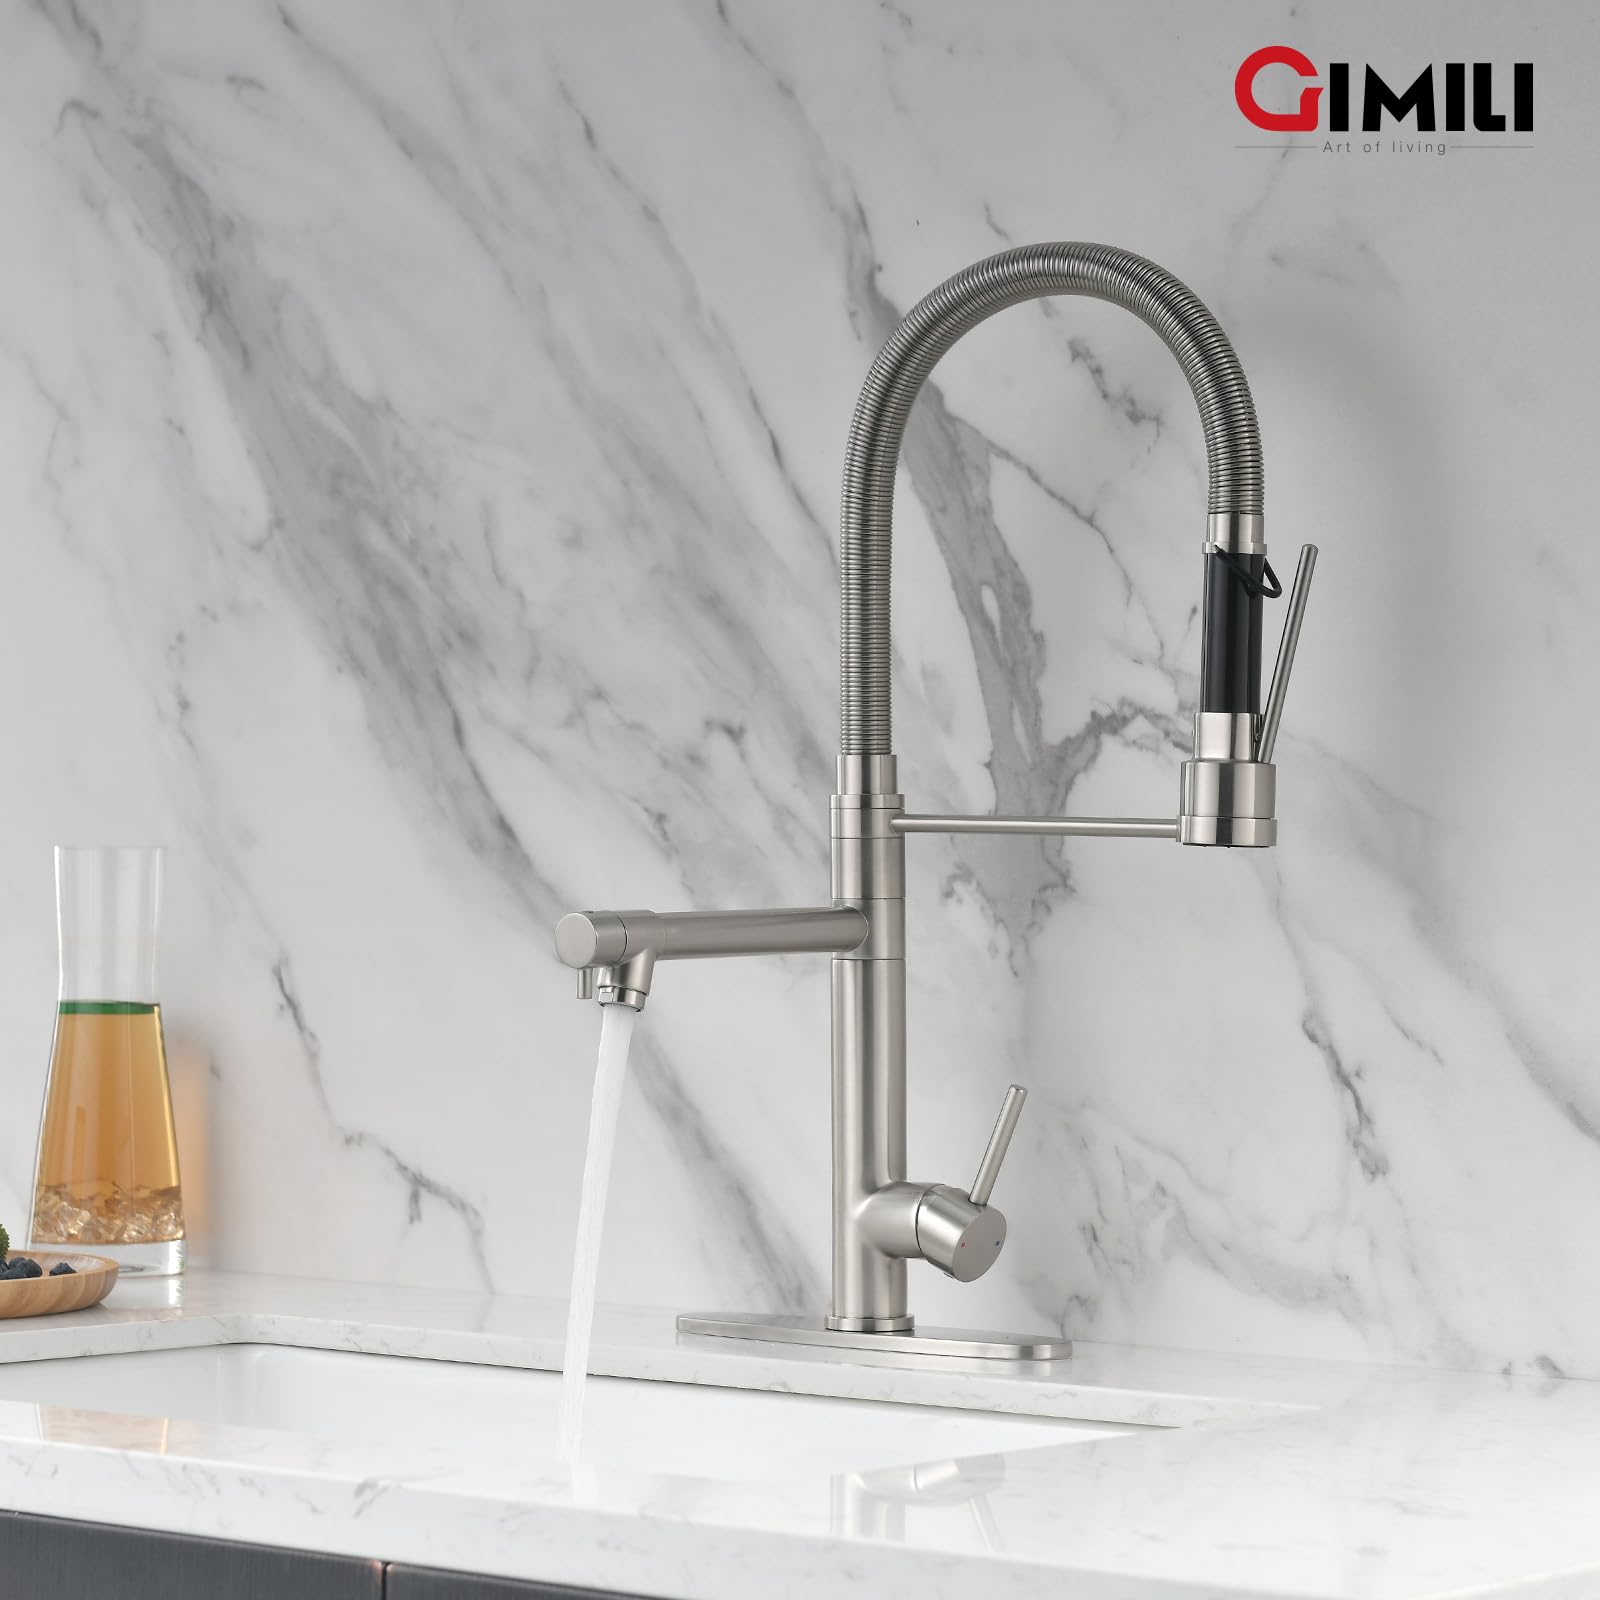 GIMILI Kitchen Faucet with Pull Down Sprayer Commercial Kitchen Faucet Double-Headed Single Handle Spring Stainless Steel Brushed Nickel Kitchen Sink Faucet